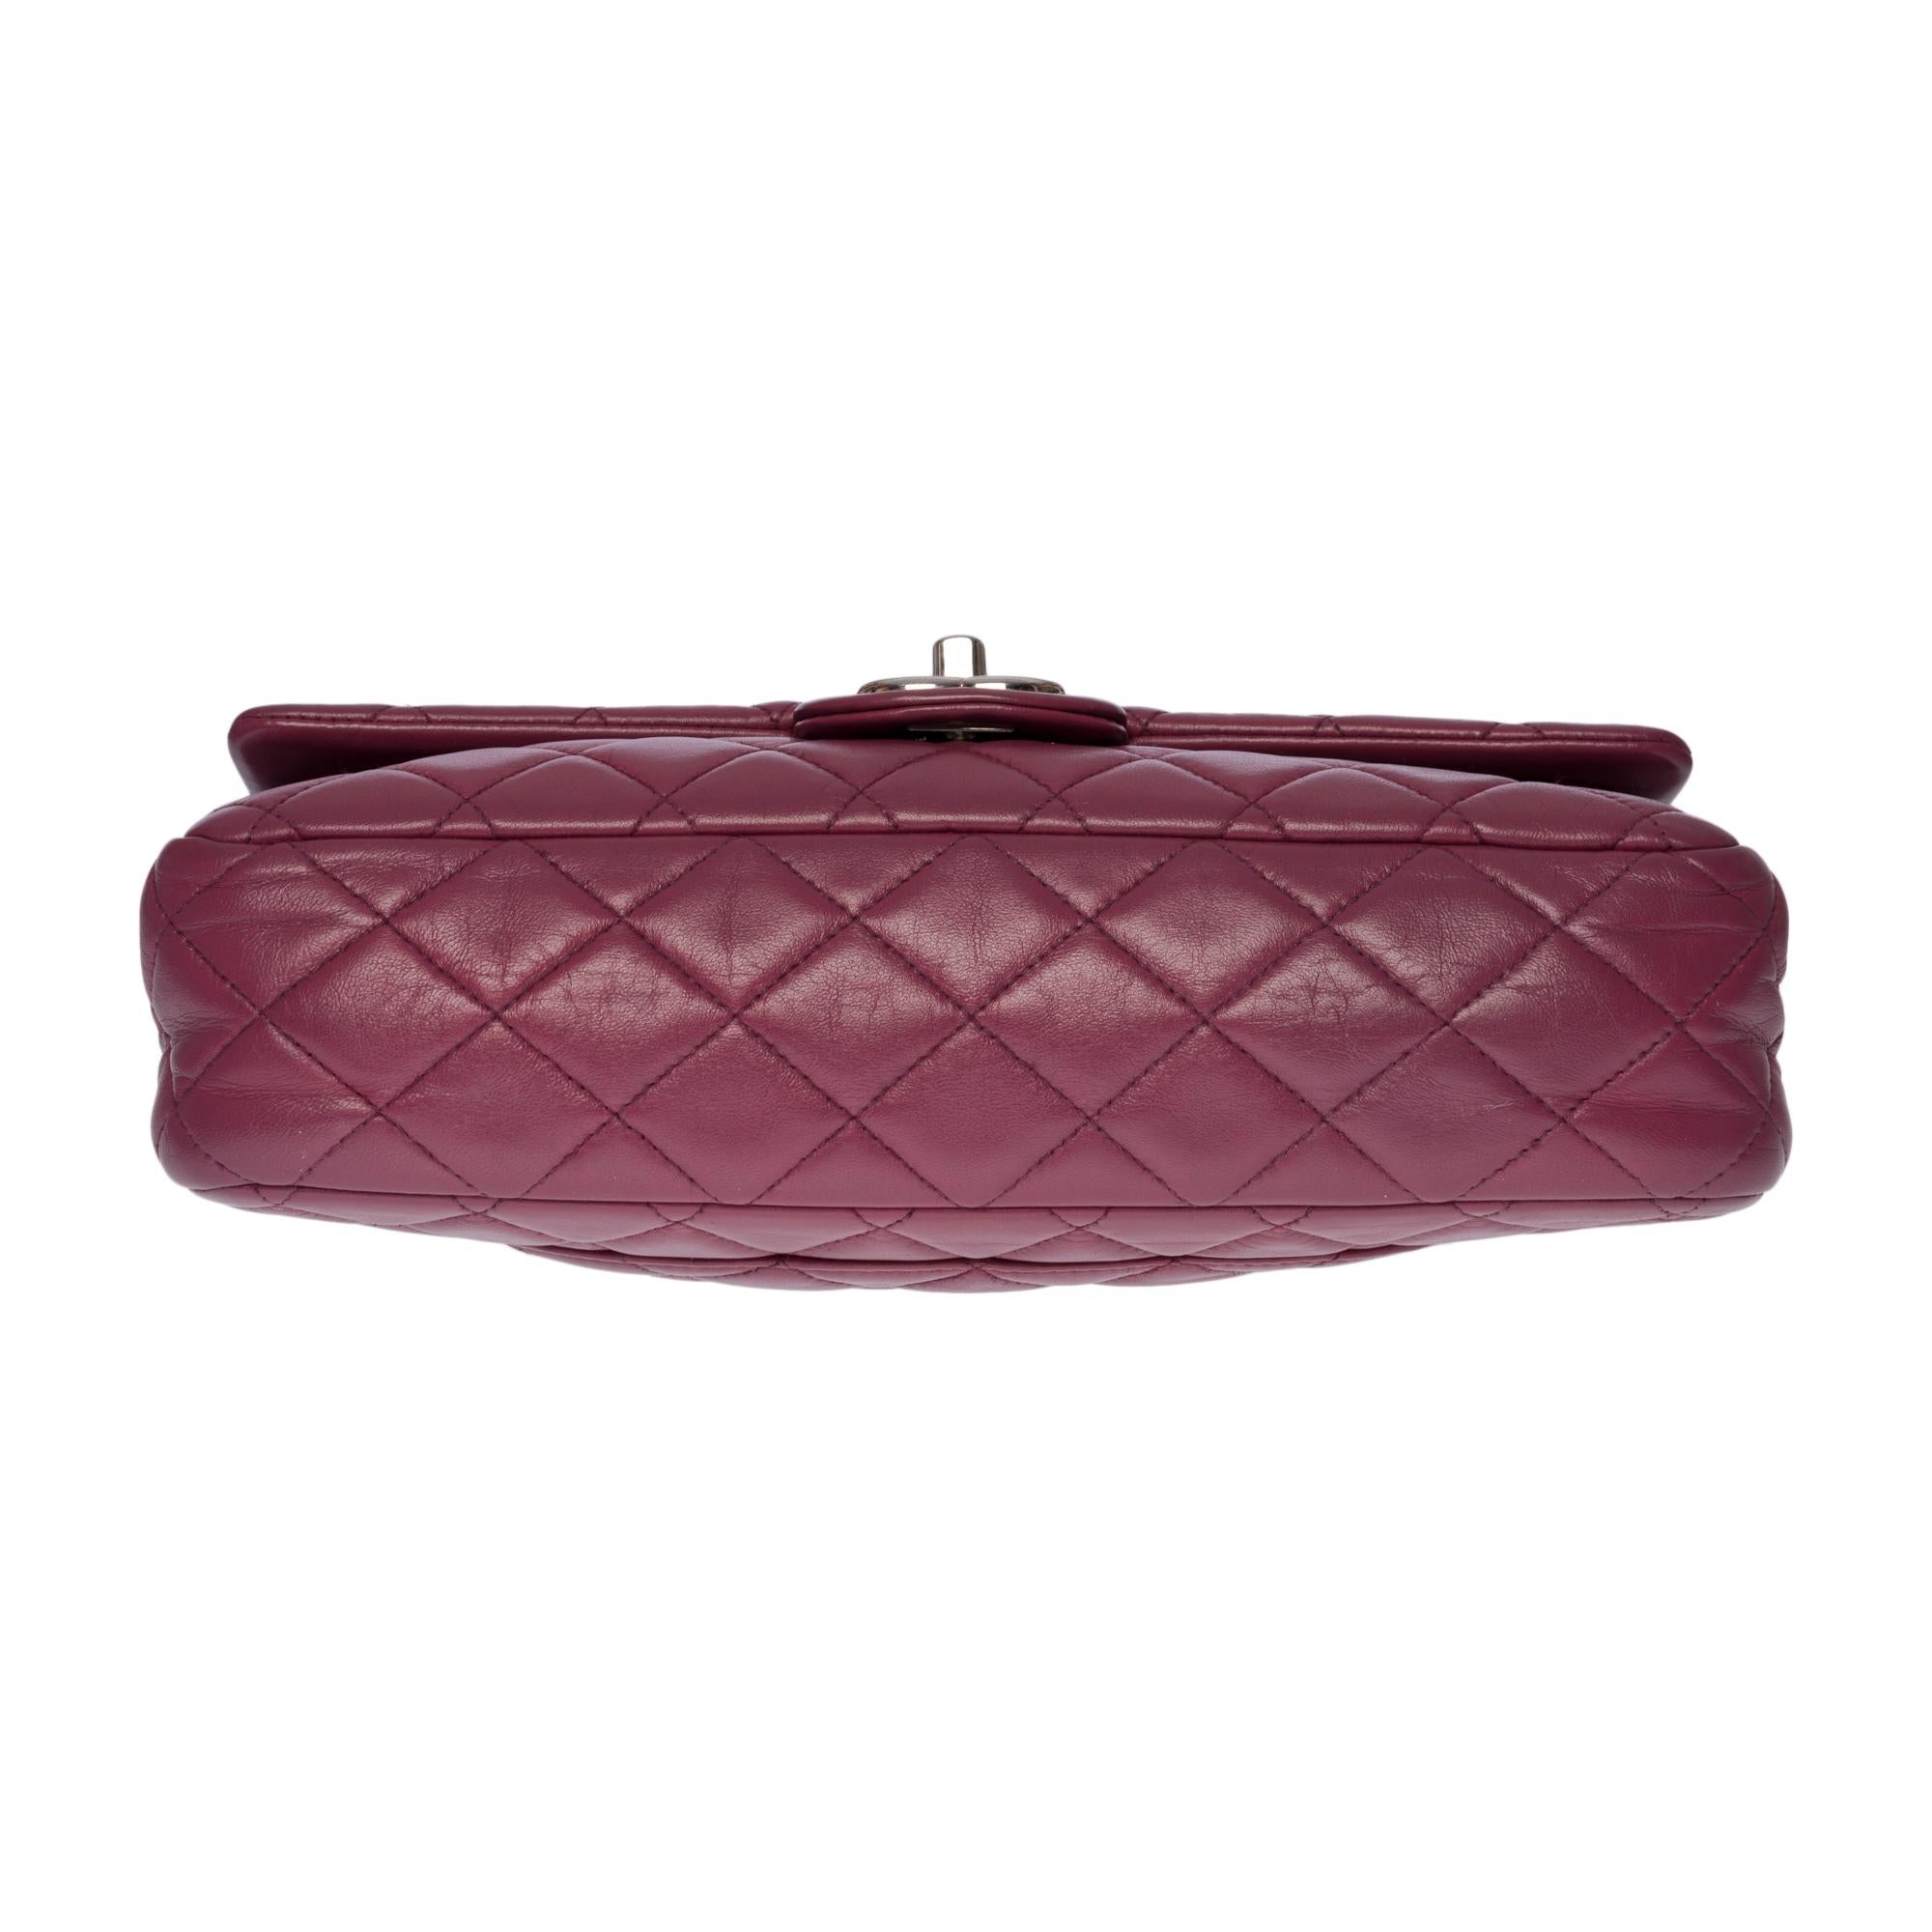 Chanel Timeless/Classic double Flap shoulder bag in Mauve quilted lambskin, SHW 3